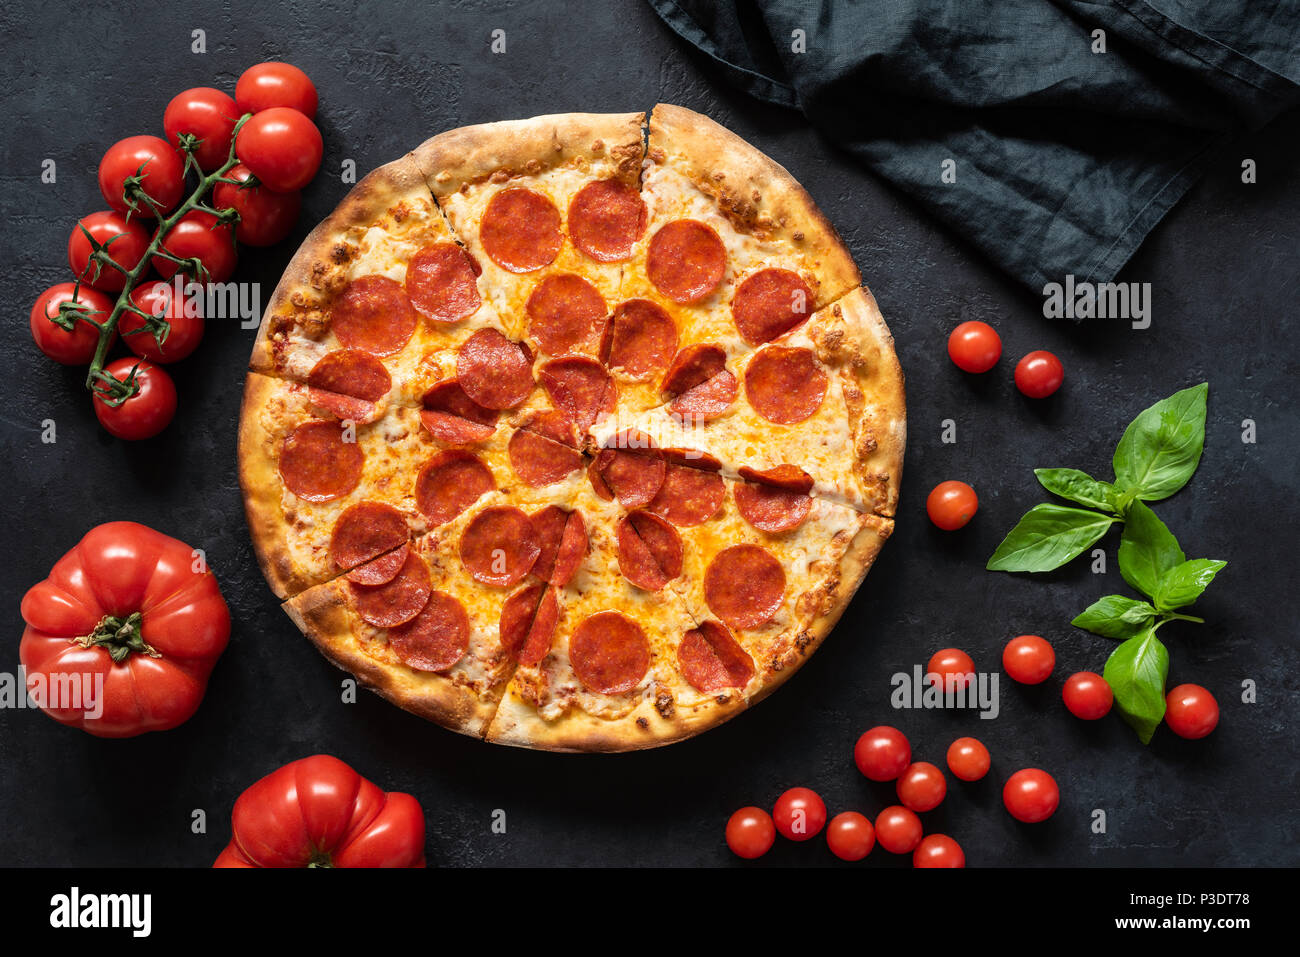 Hot pepperoni pizza on black stone background. Sliced tasty pizza with salami, cheese and tomatoes on dark table, top view Stock Photo